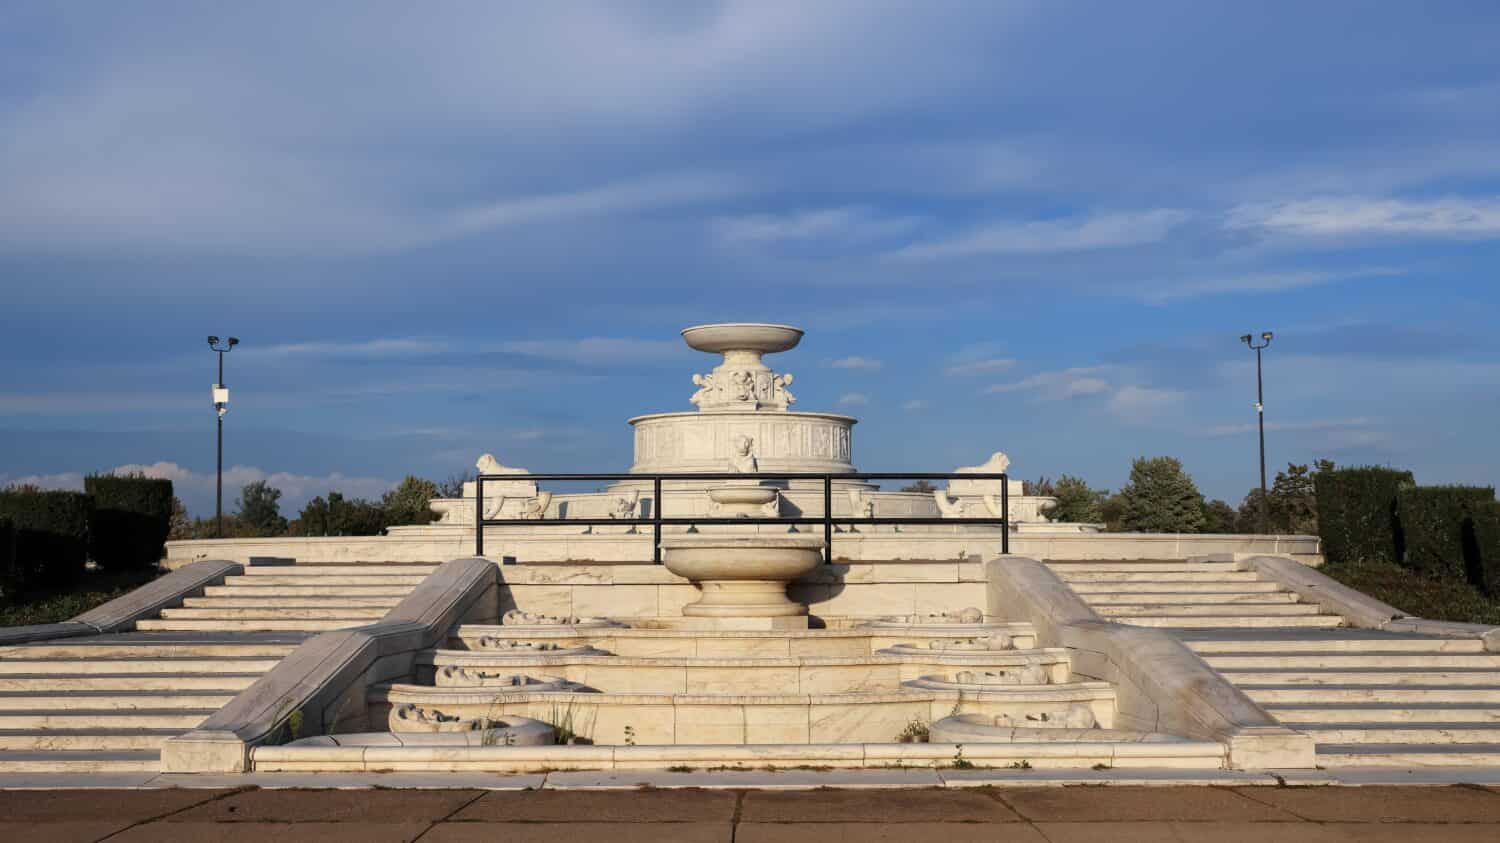 A beautiful sculpture of Detroit's Bell Isle fountain against dramatic sky